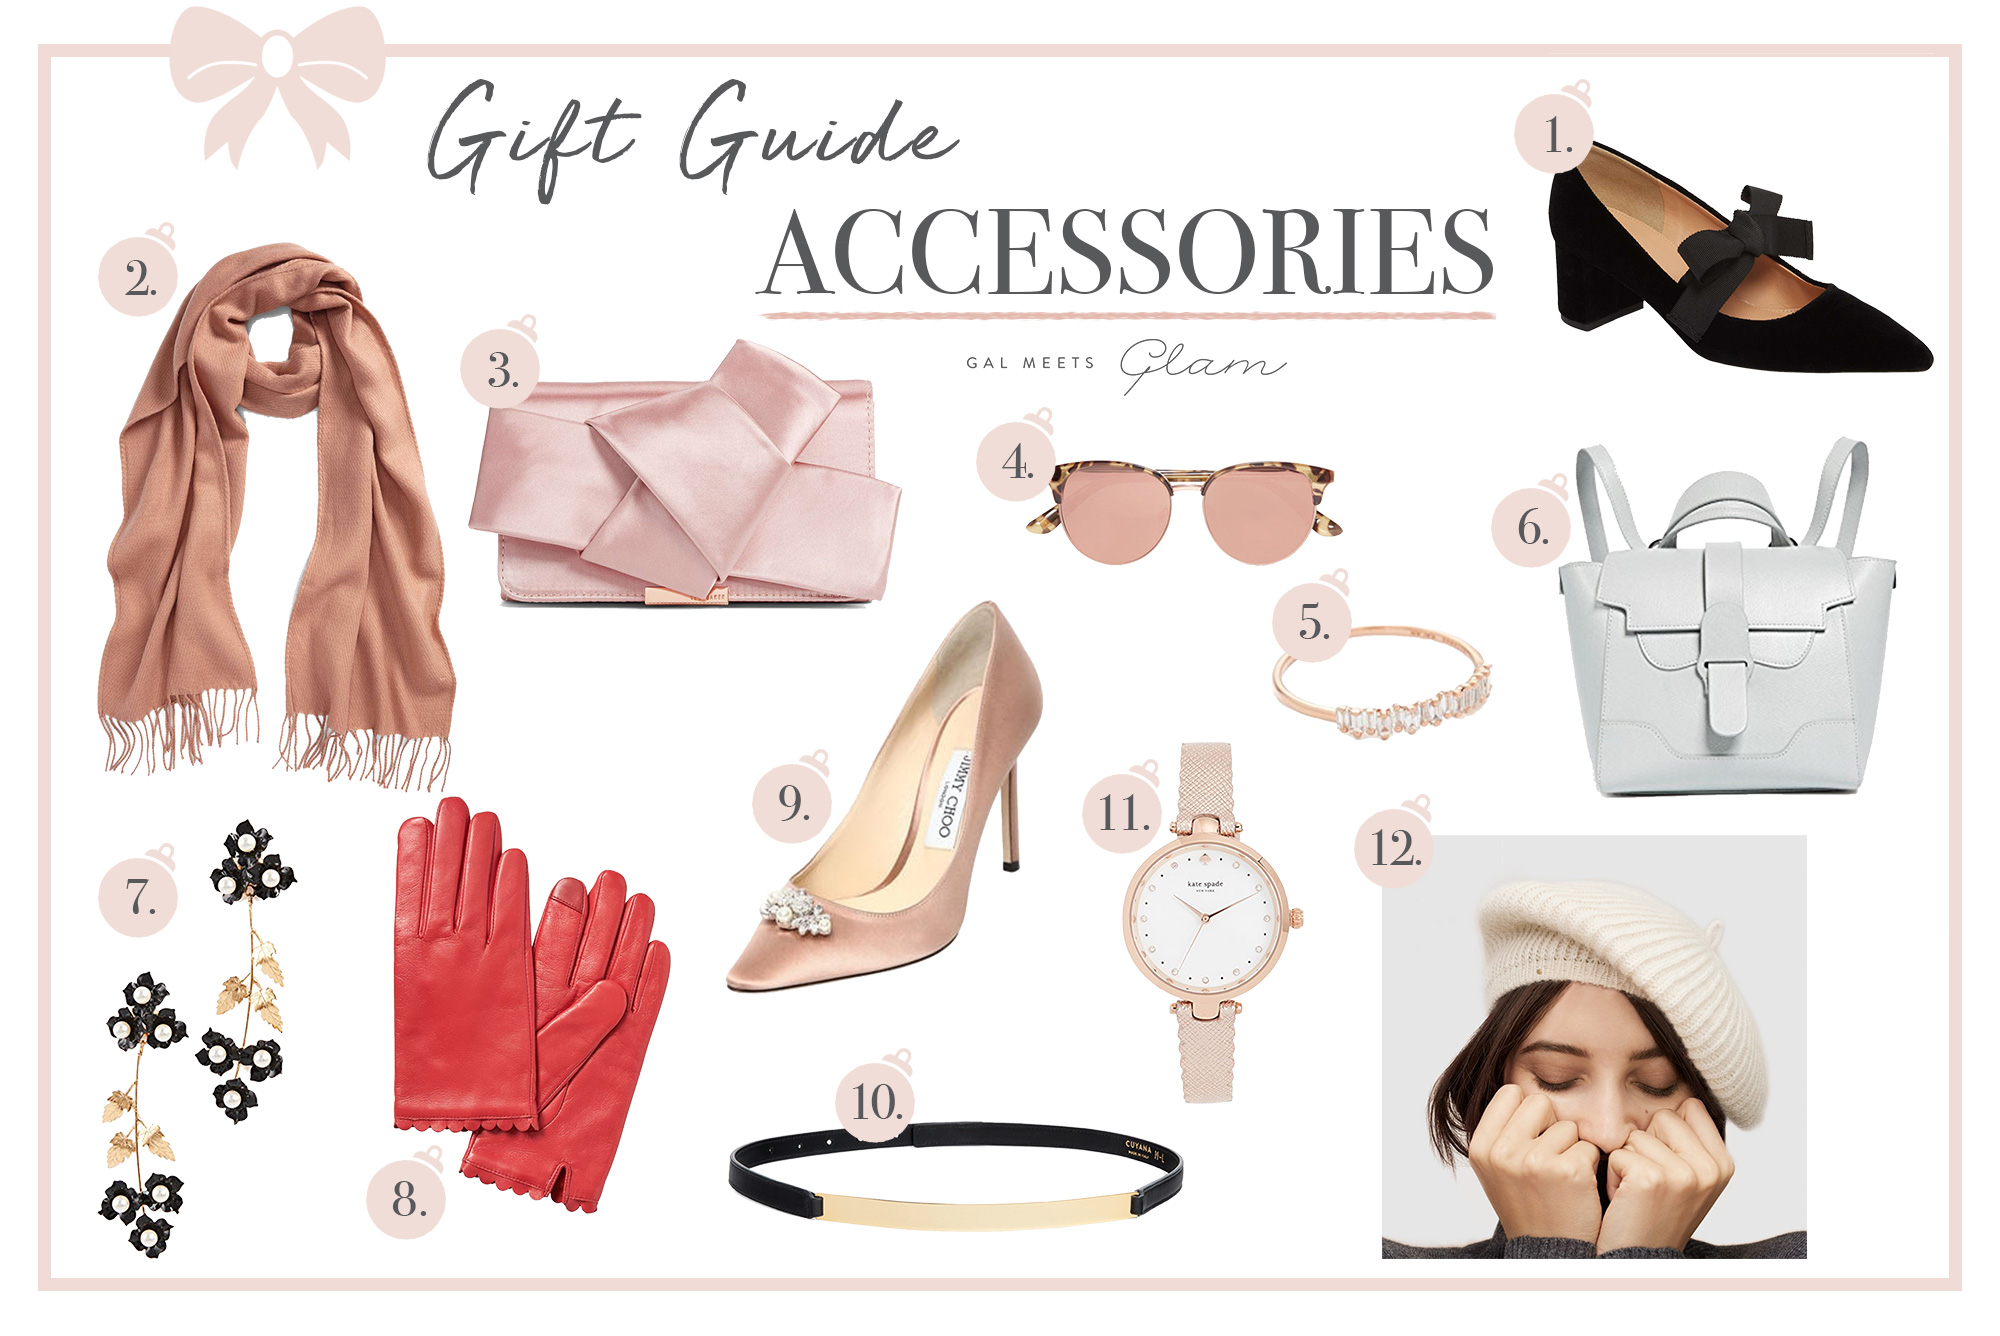 Gift Guide for Her - 2017 Holiday Gift Guide for Women